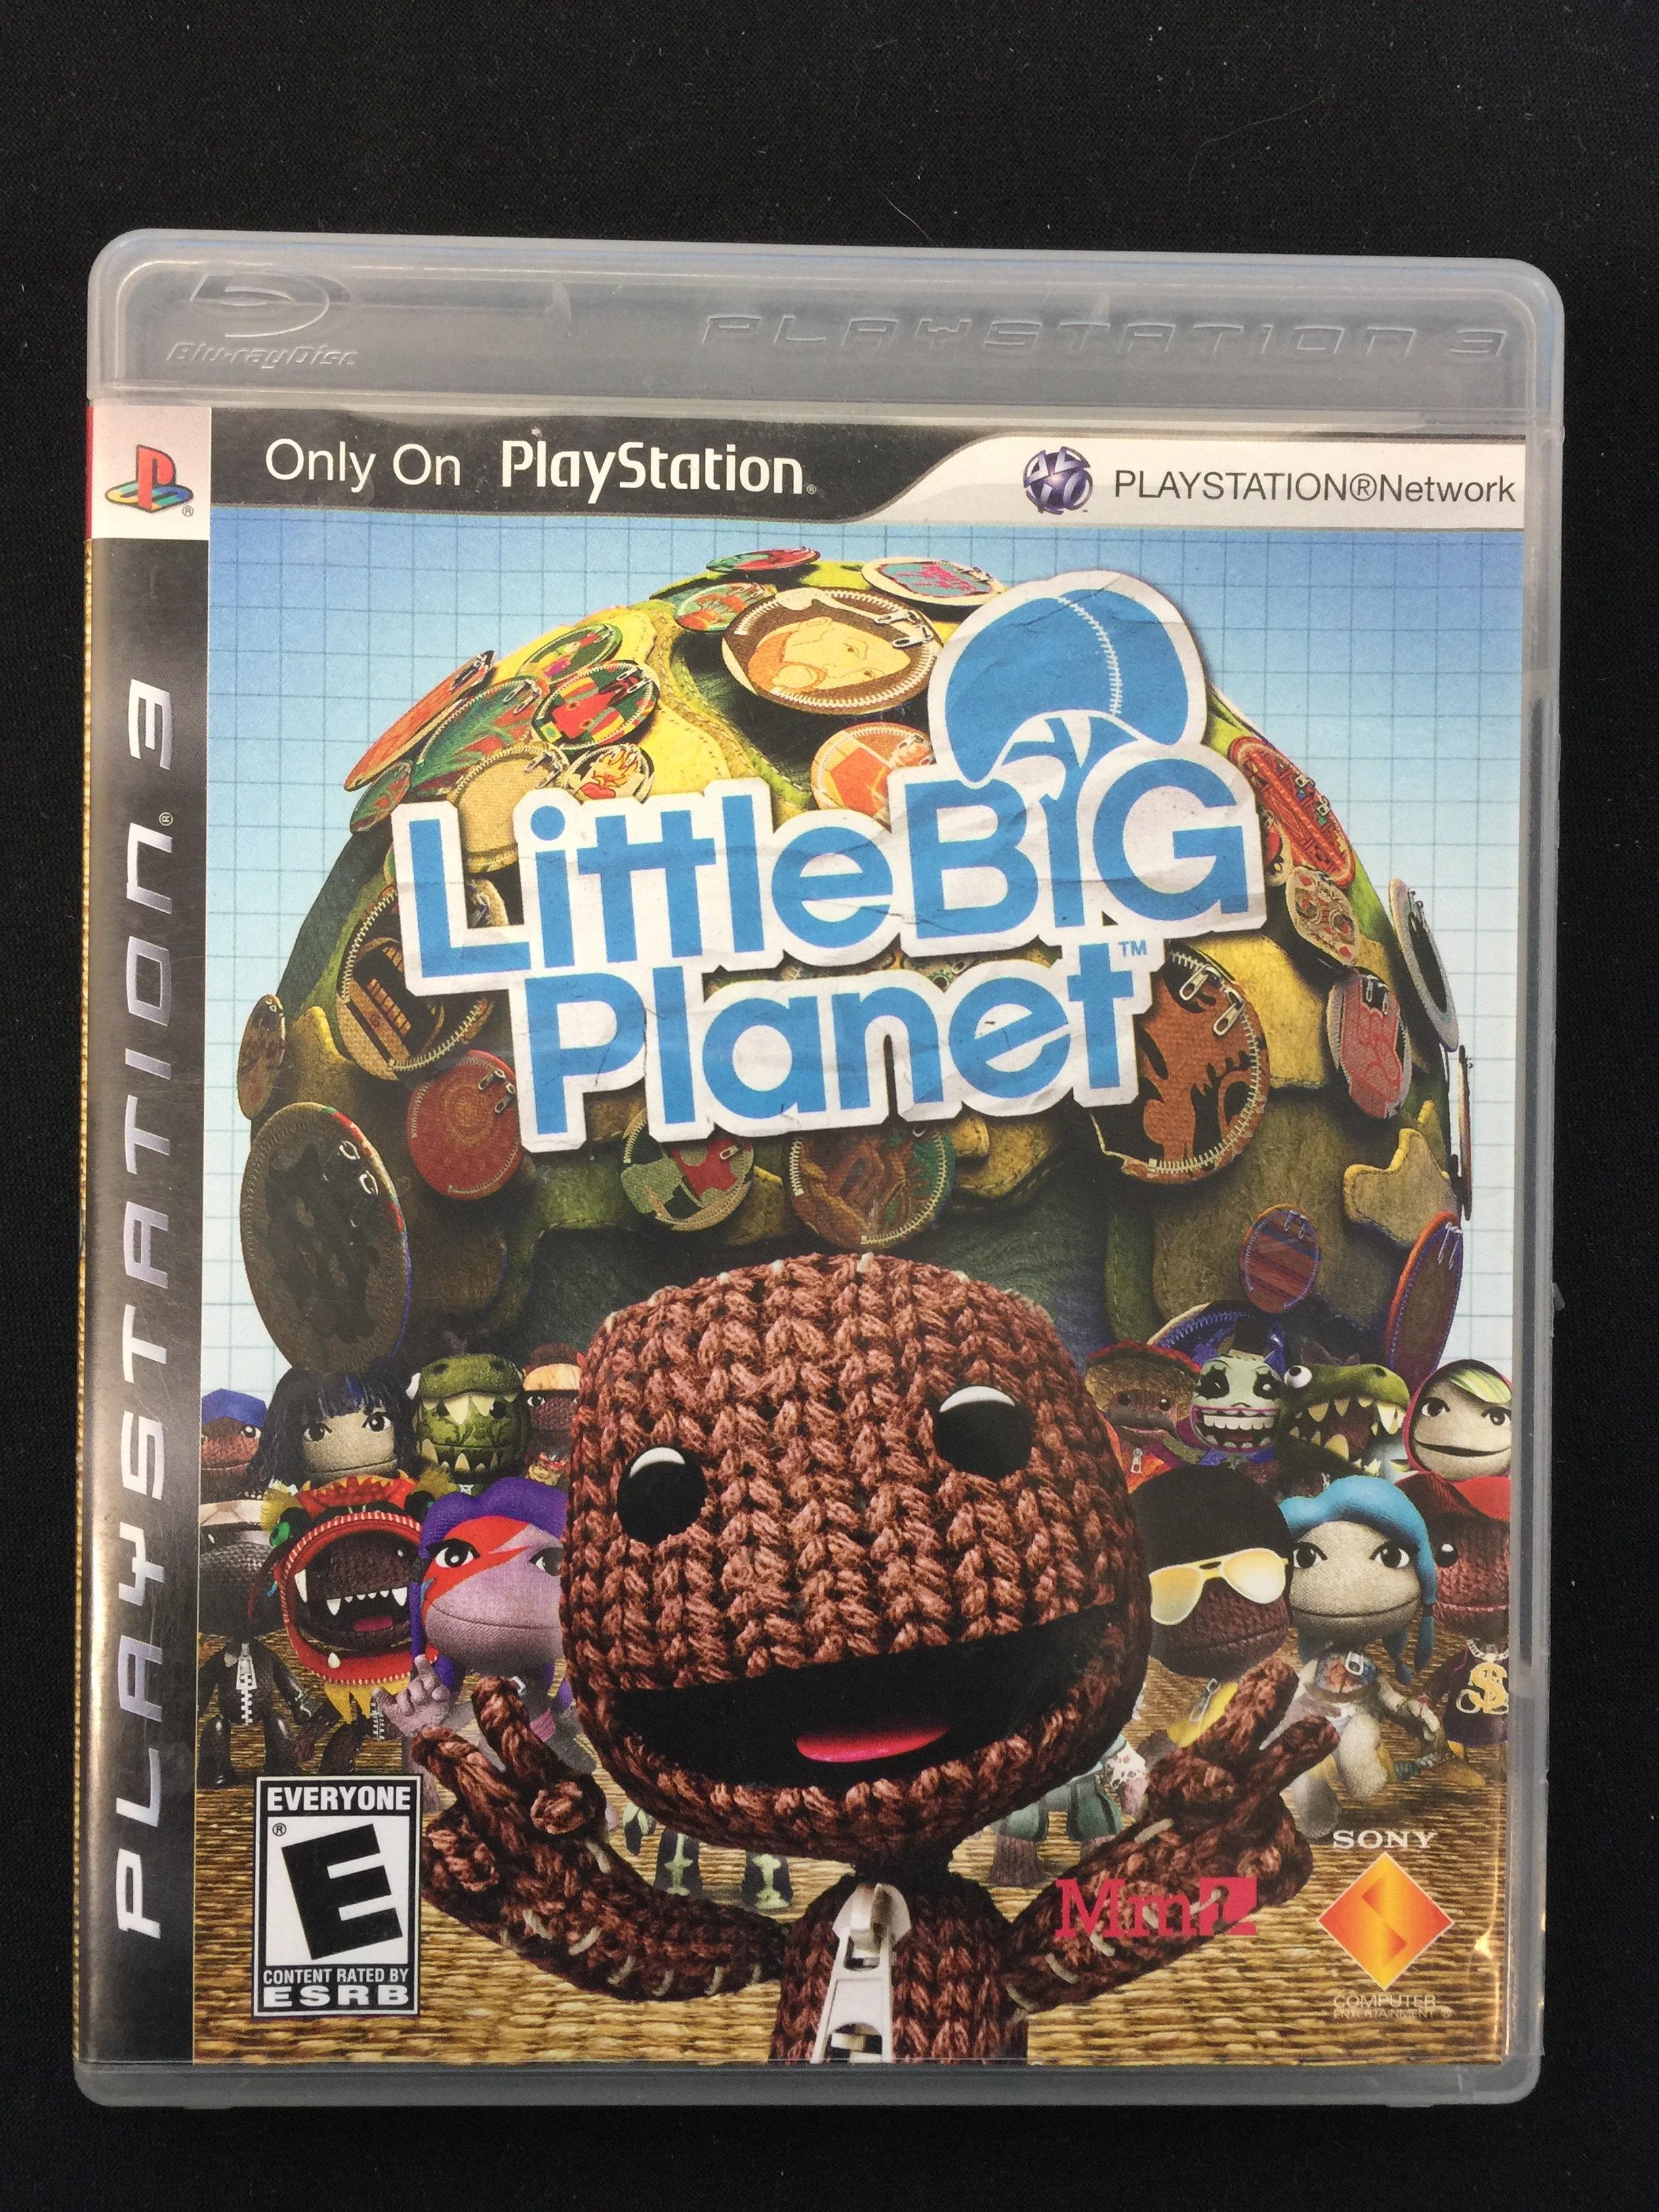 PS3 Playstation 3 Little Big Planet Video Game